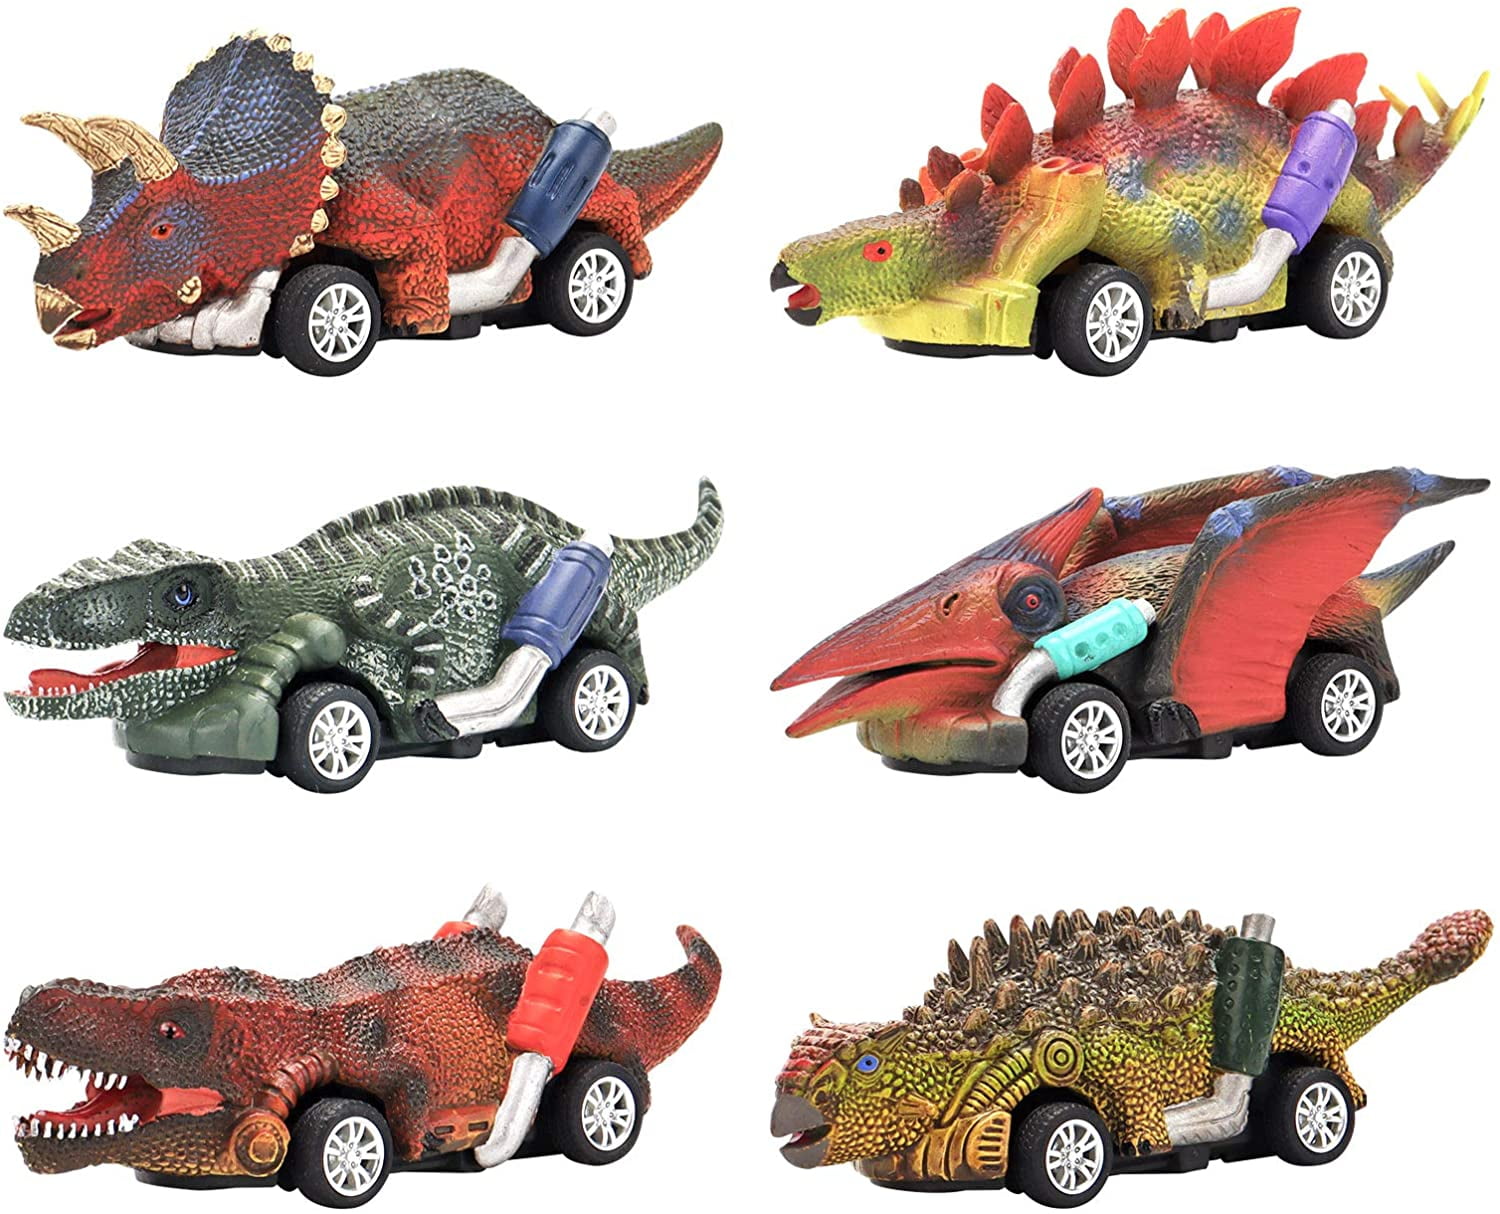 Transer Dinosaur Model Mini Race Vehicles Toys for Kids Toddlers Boys Child A Pull Back and Go Car Toy 